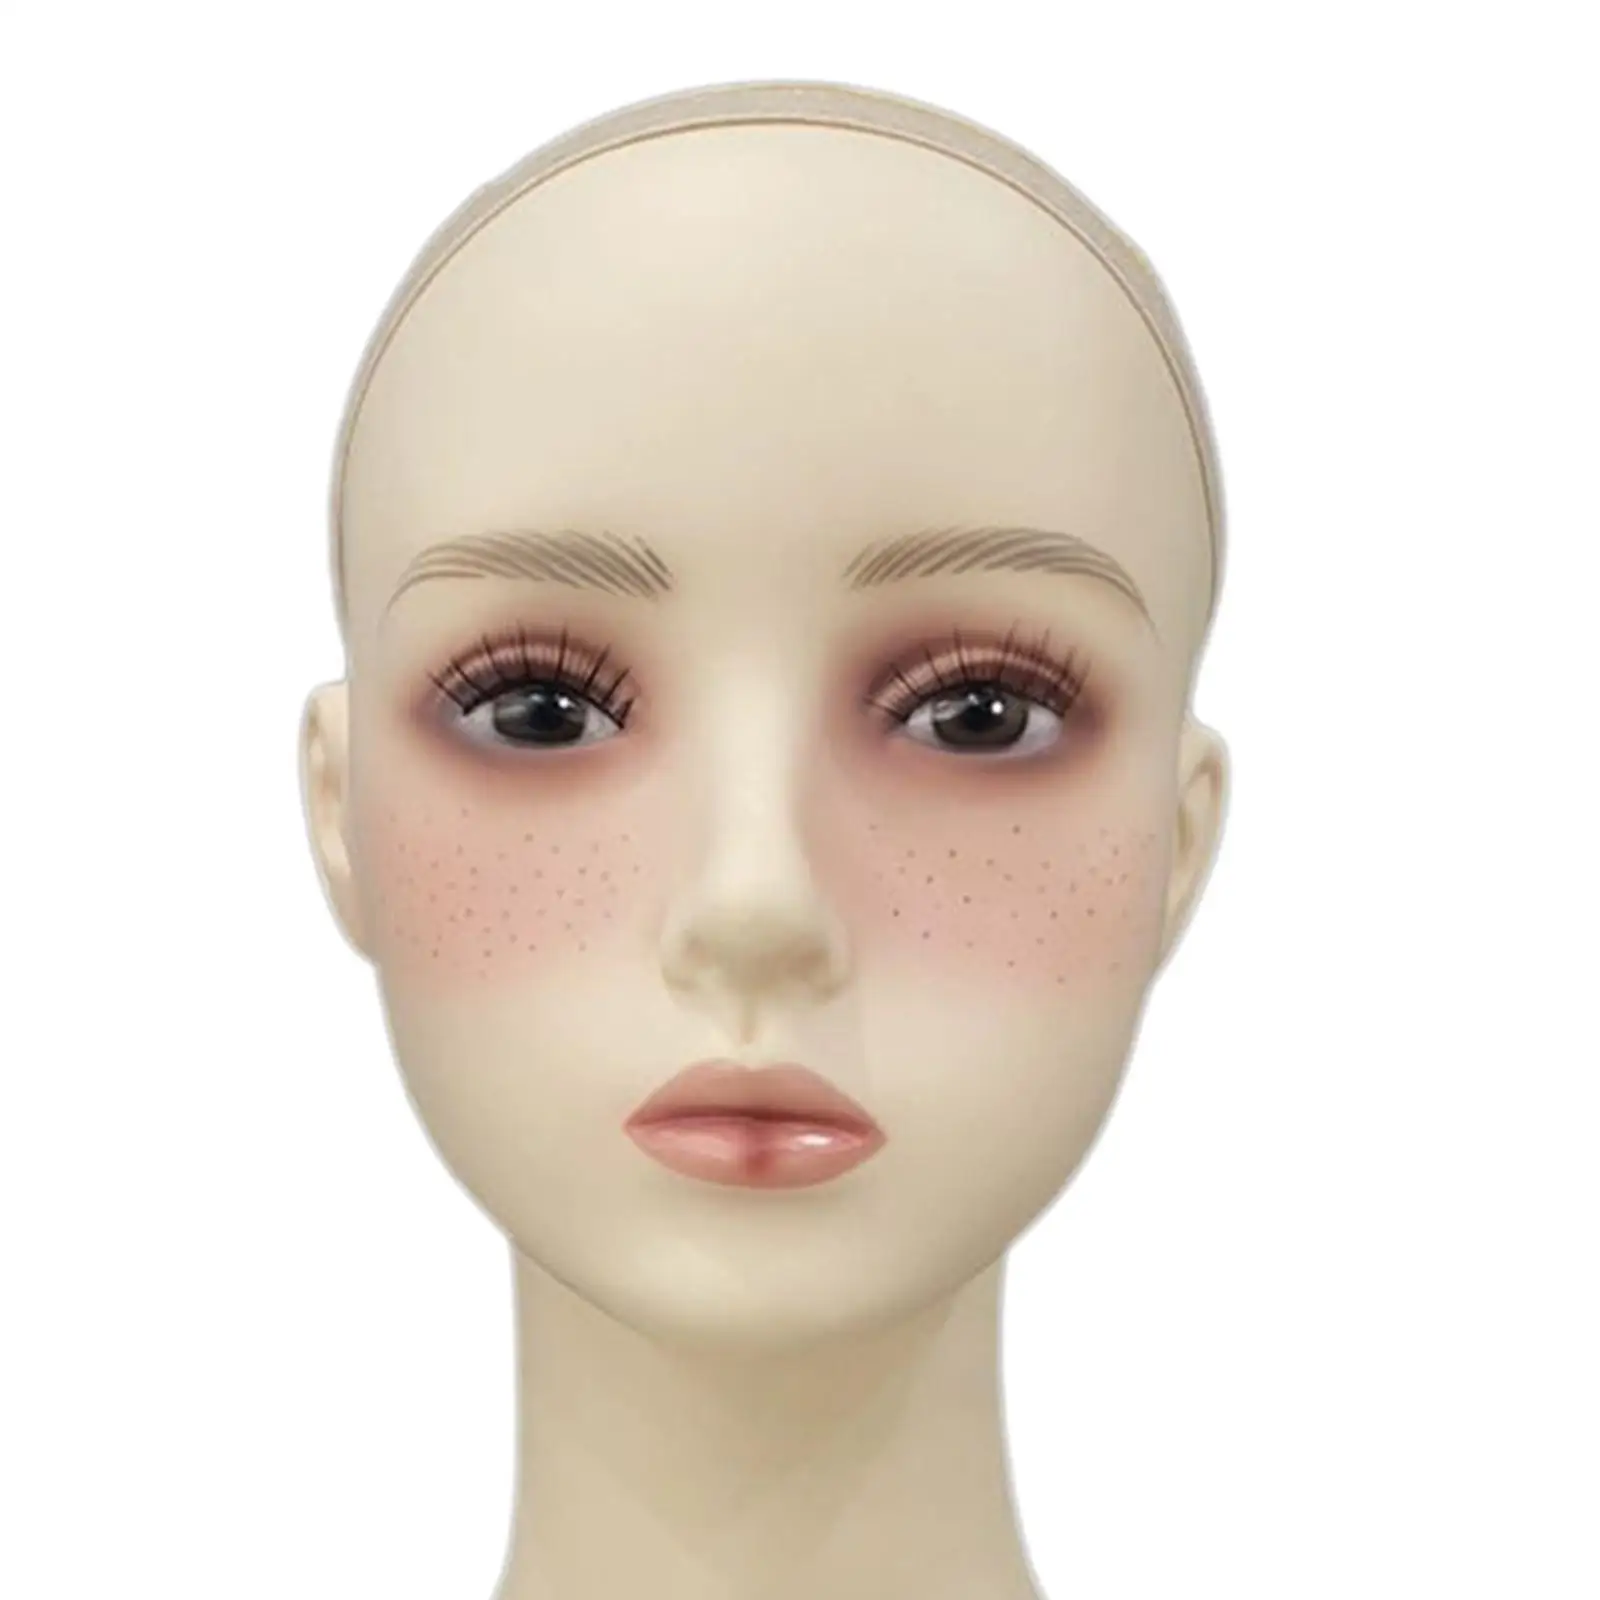 Female Bald Mannequin Head Multipurpose Sturdy Mannequin Head Wig Head for Making Display Hair Styling Wig Making Cap Hats